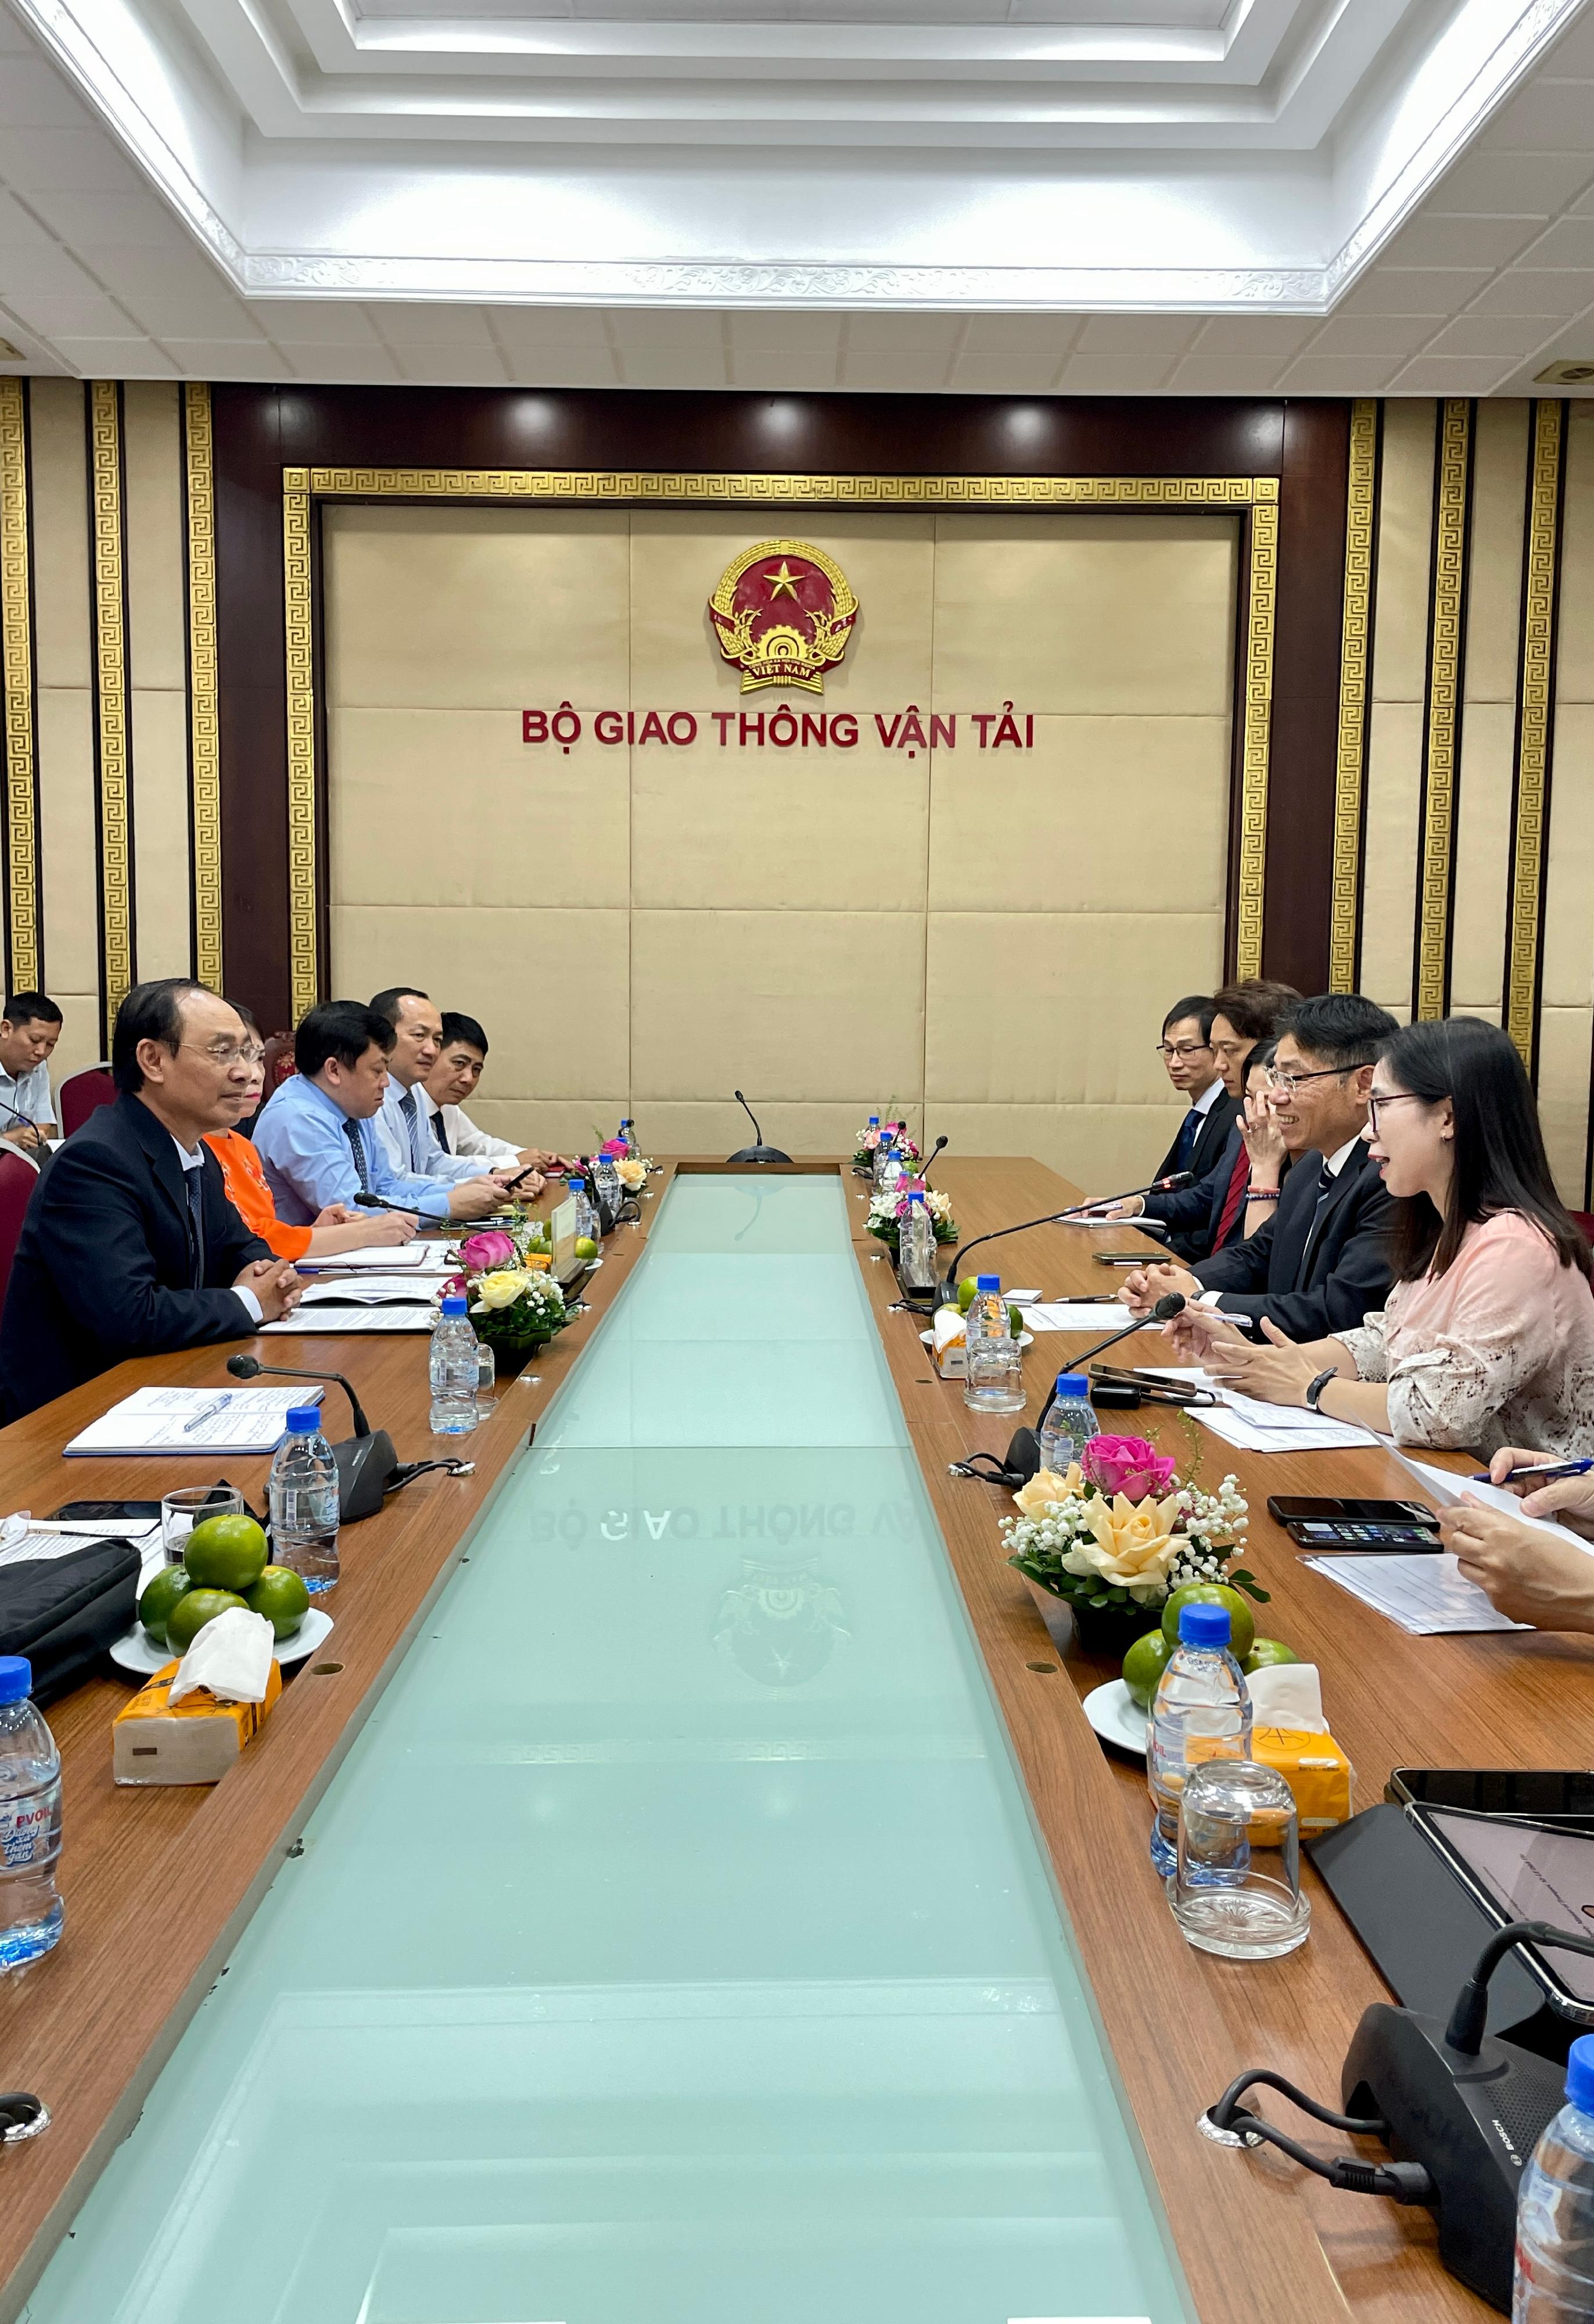 The Secretary for Transport and Logistics, Mr Lam Sai-hung (second right), met with the Deputy Minister of Transport of Vietnam, Mr Le Dinh Tho (first left), in Hanoi today (October 11). They exchanged views on issues of mutual concern and explored business opportunities between Hong Kong and Vietnam. 